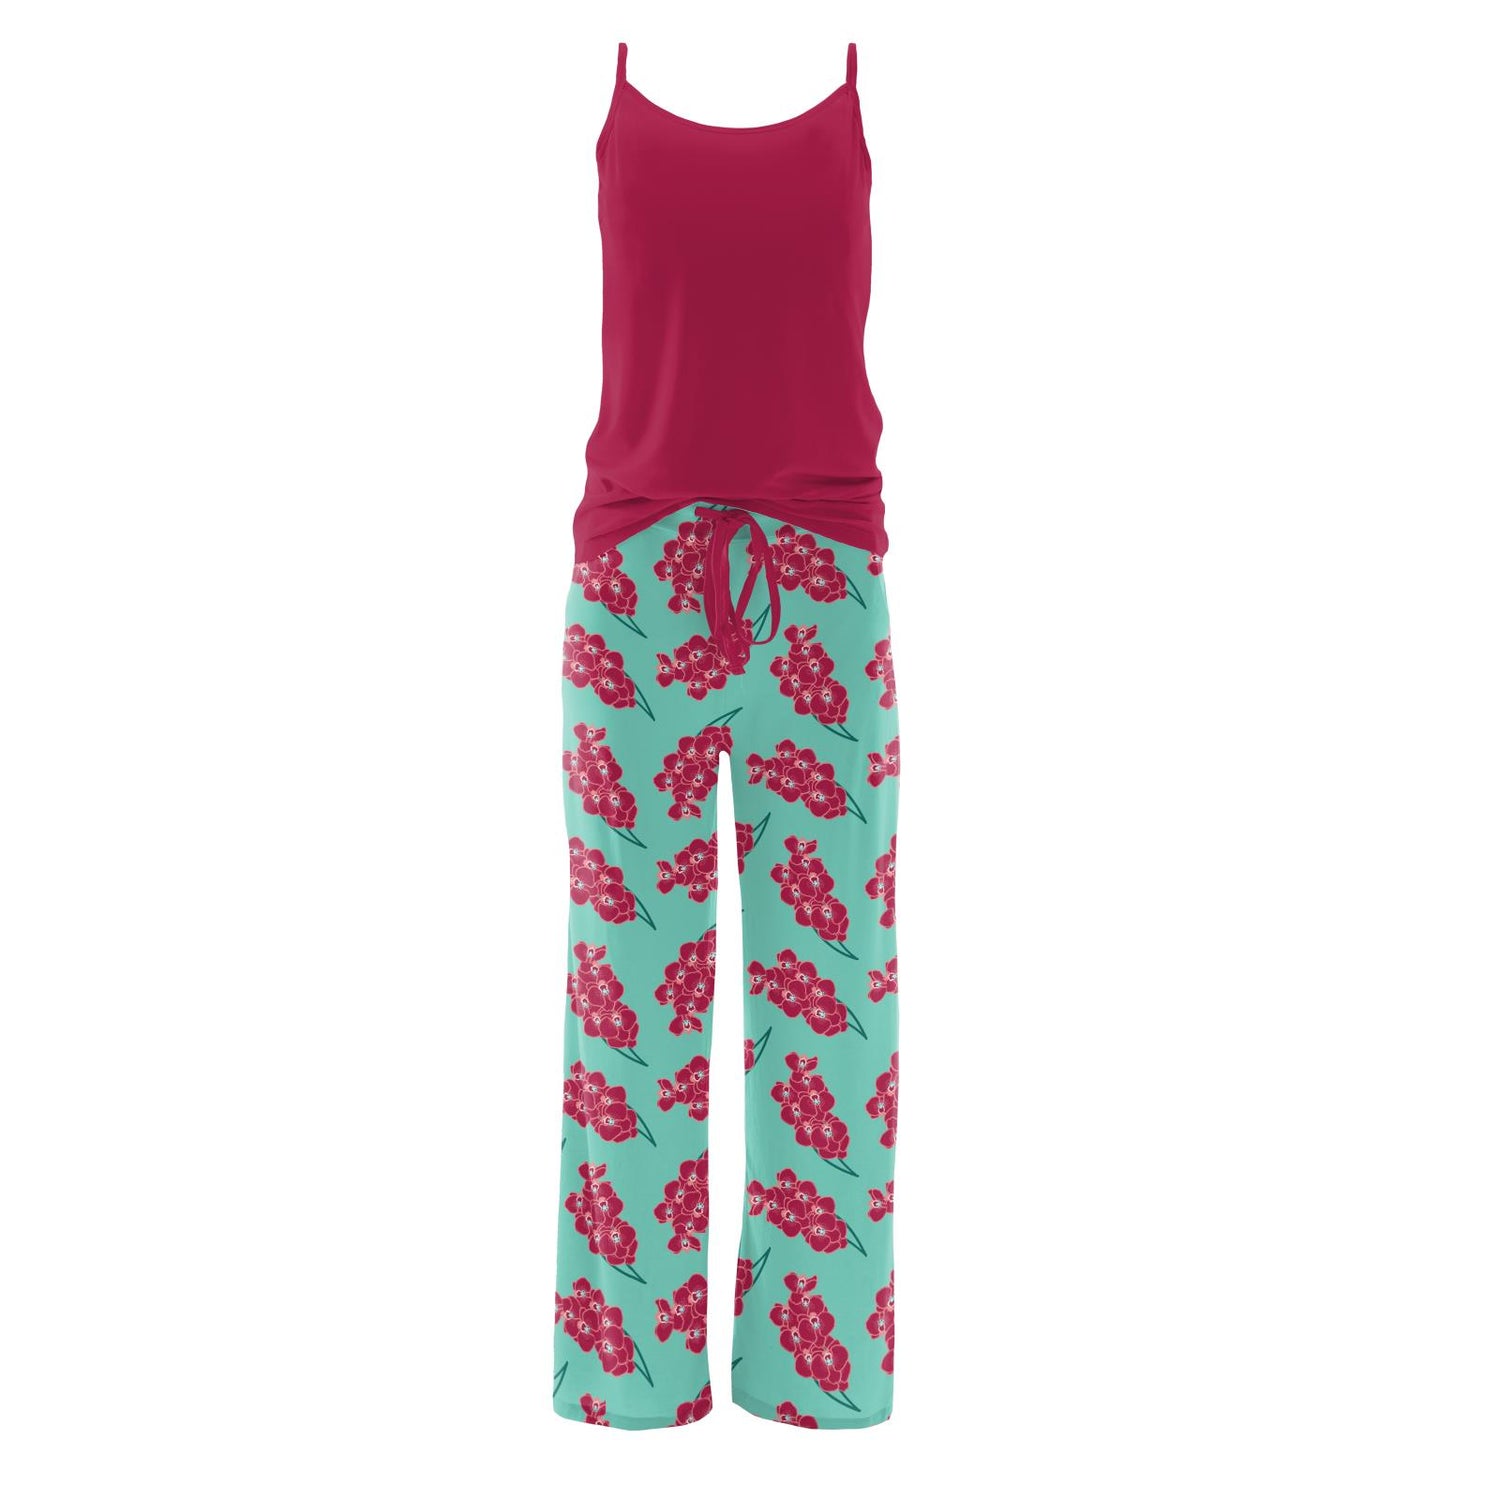 Cami and Print Lounge Pants Pajama Set in Glass Orchids